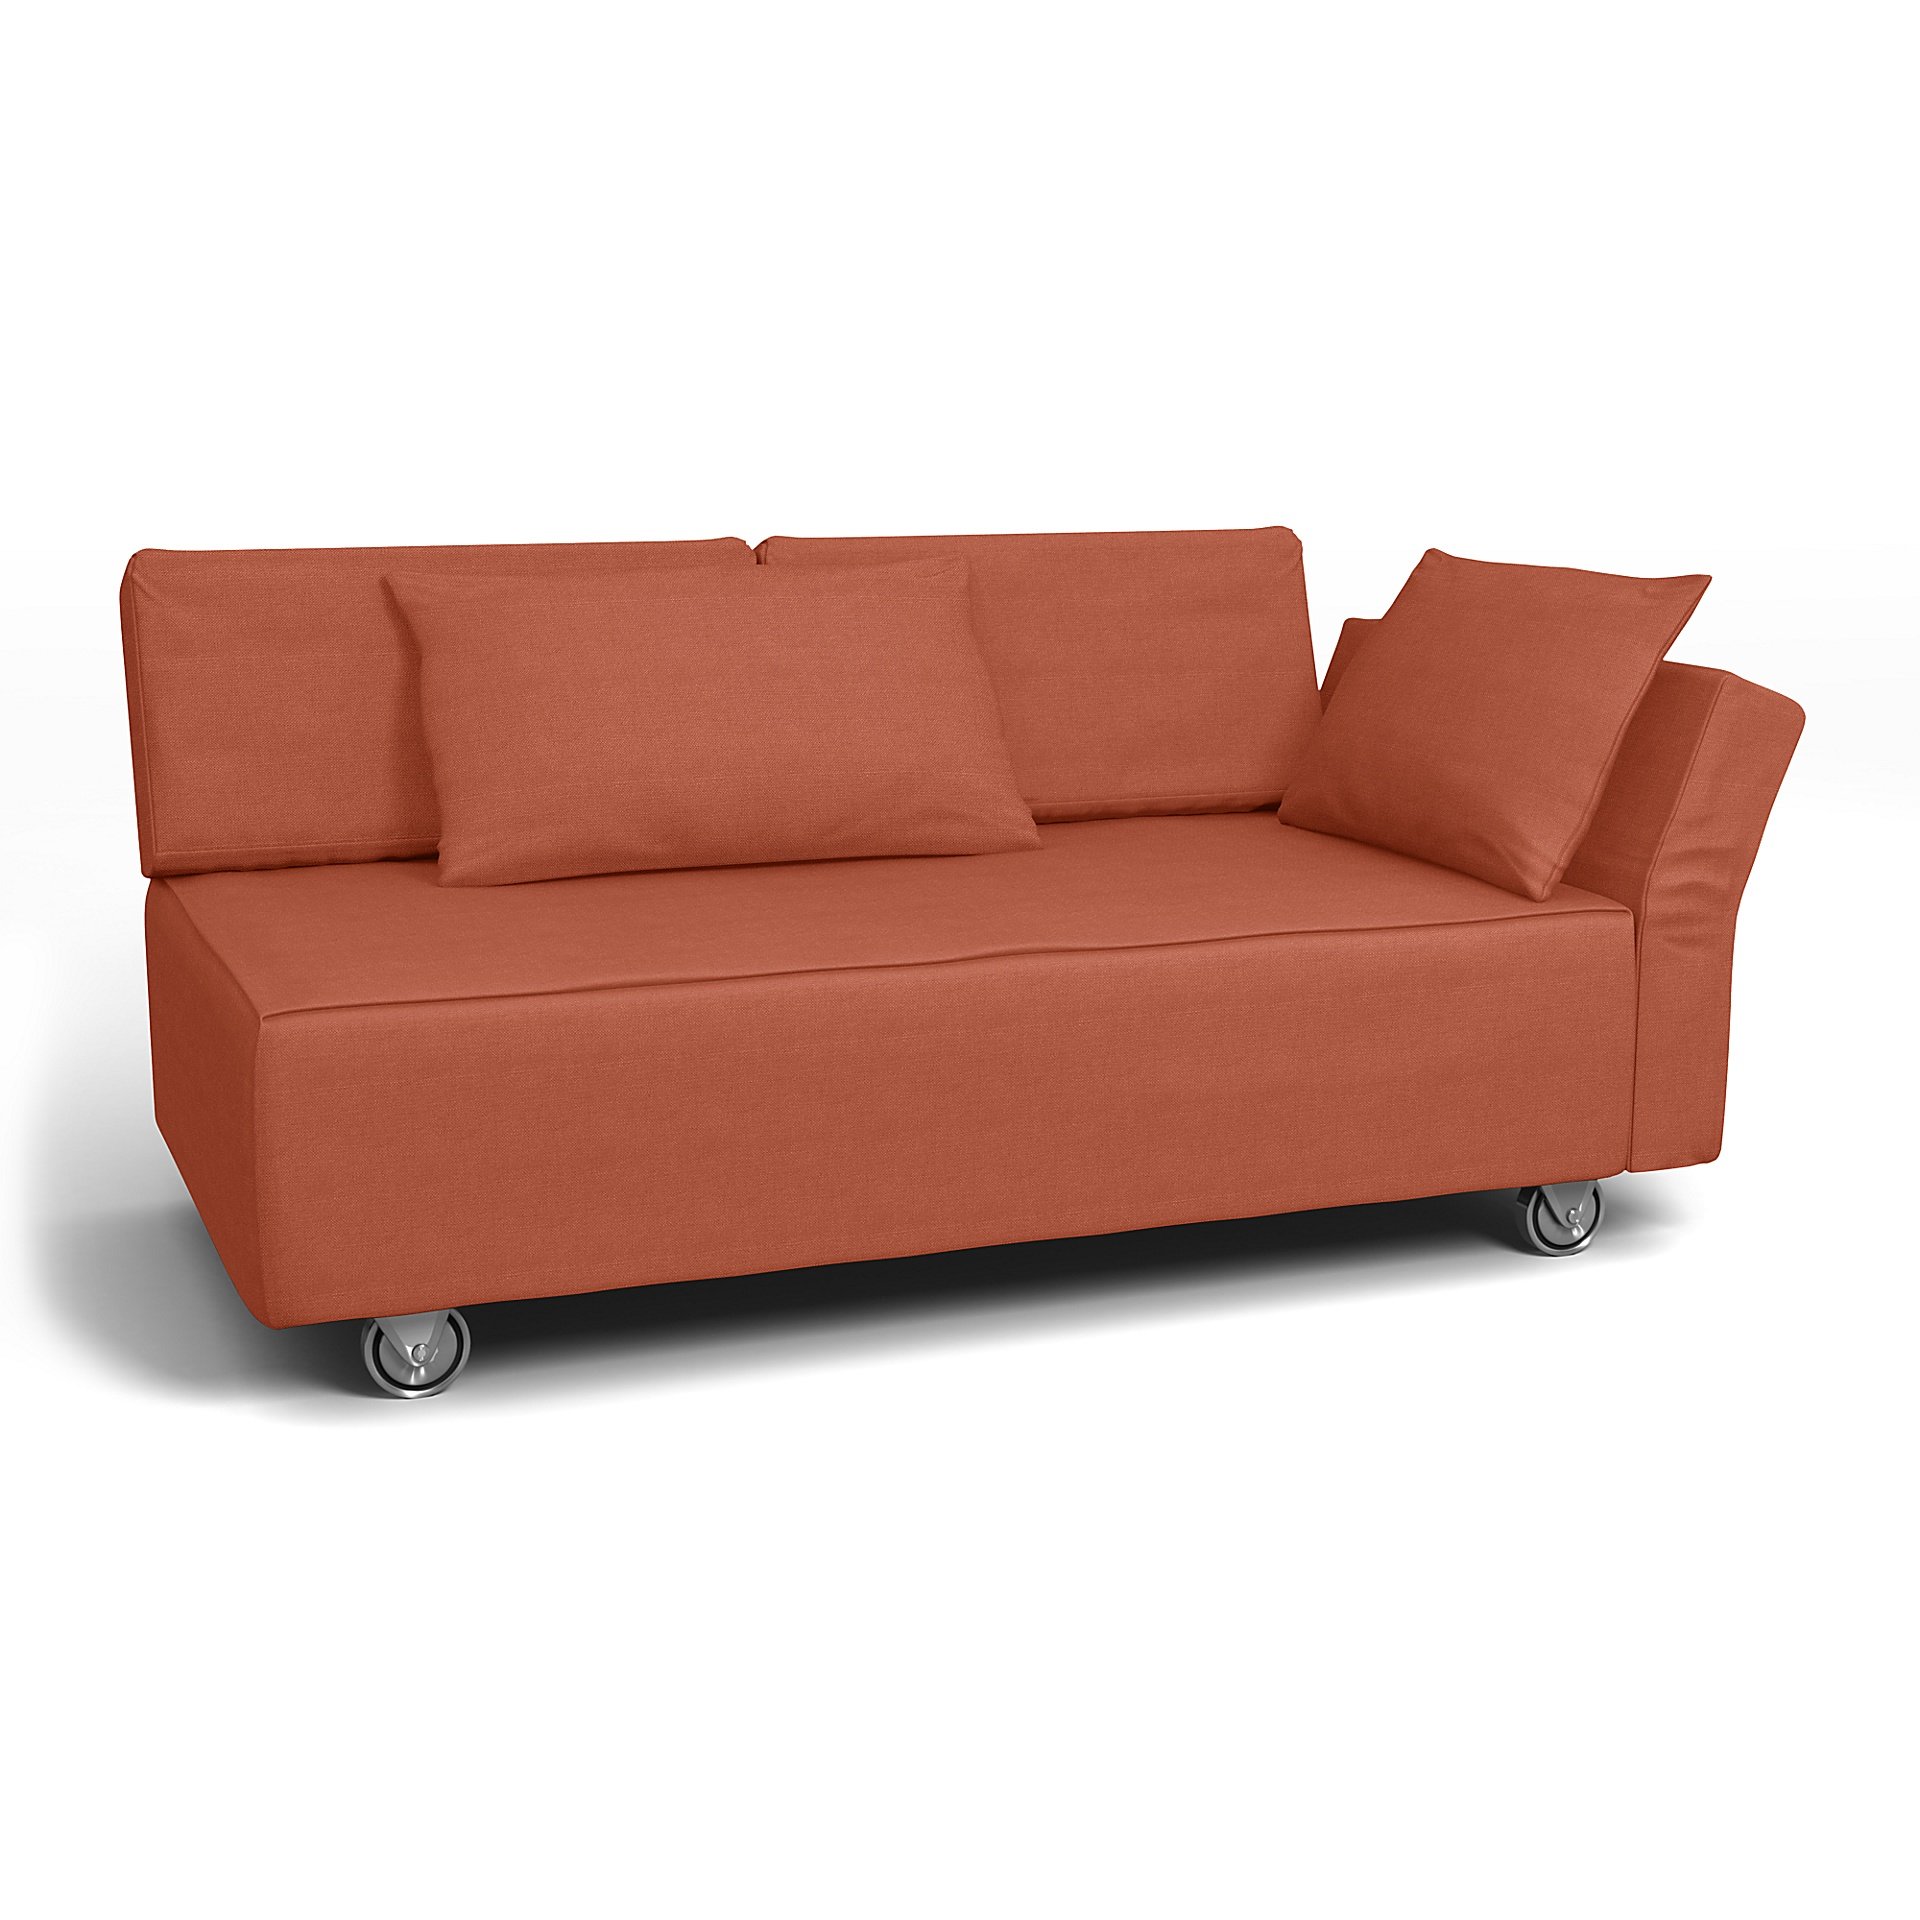 IKEA - Falsterbo 2 Seat Sofa with Right Arm Cover, Burnt Orange, Linen - Bemz